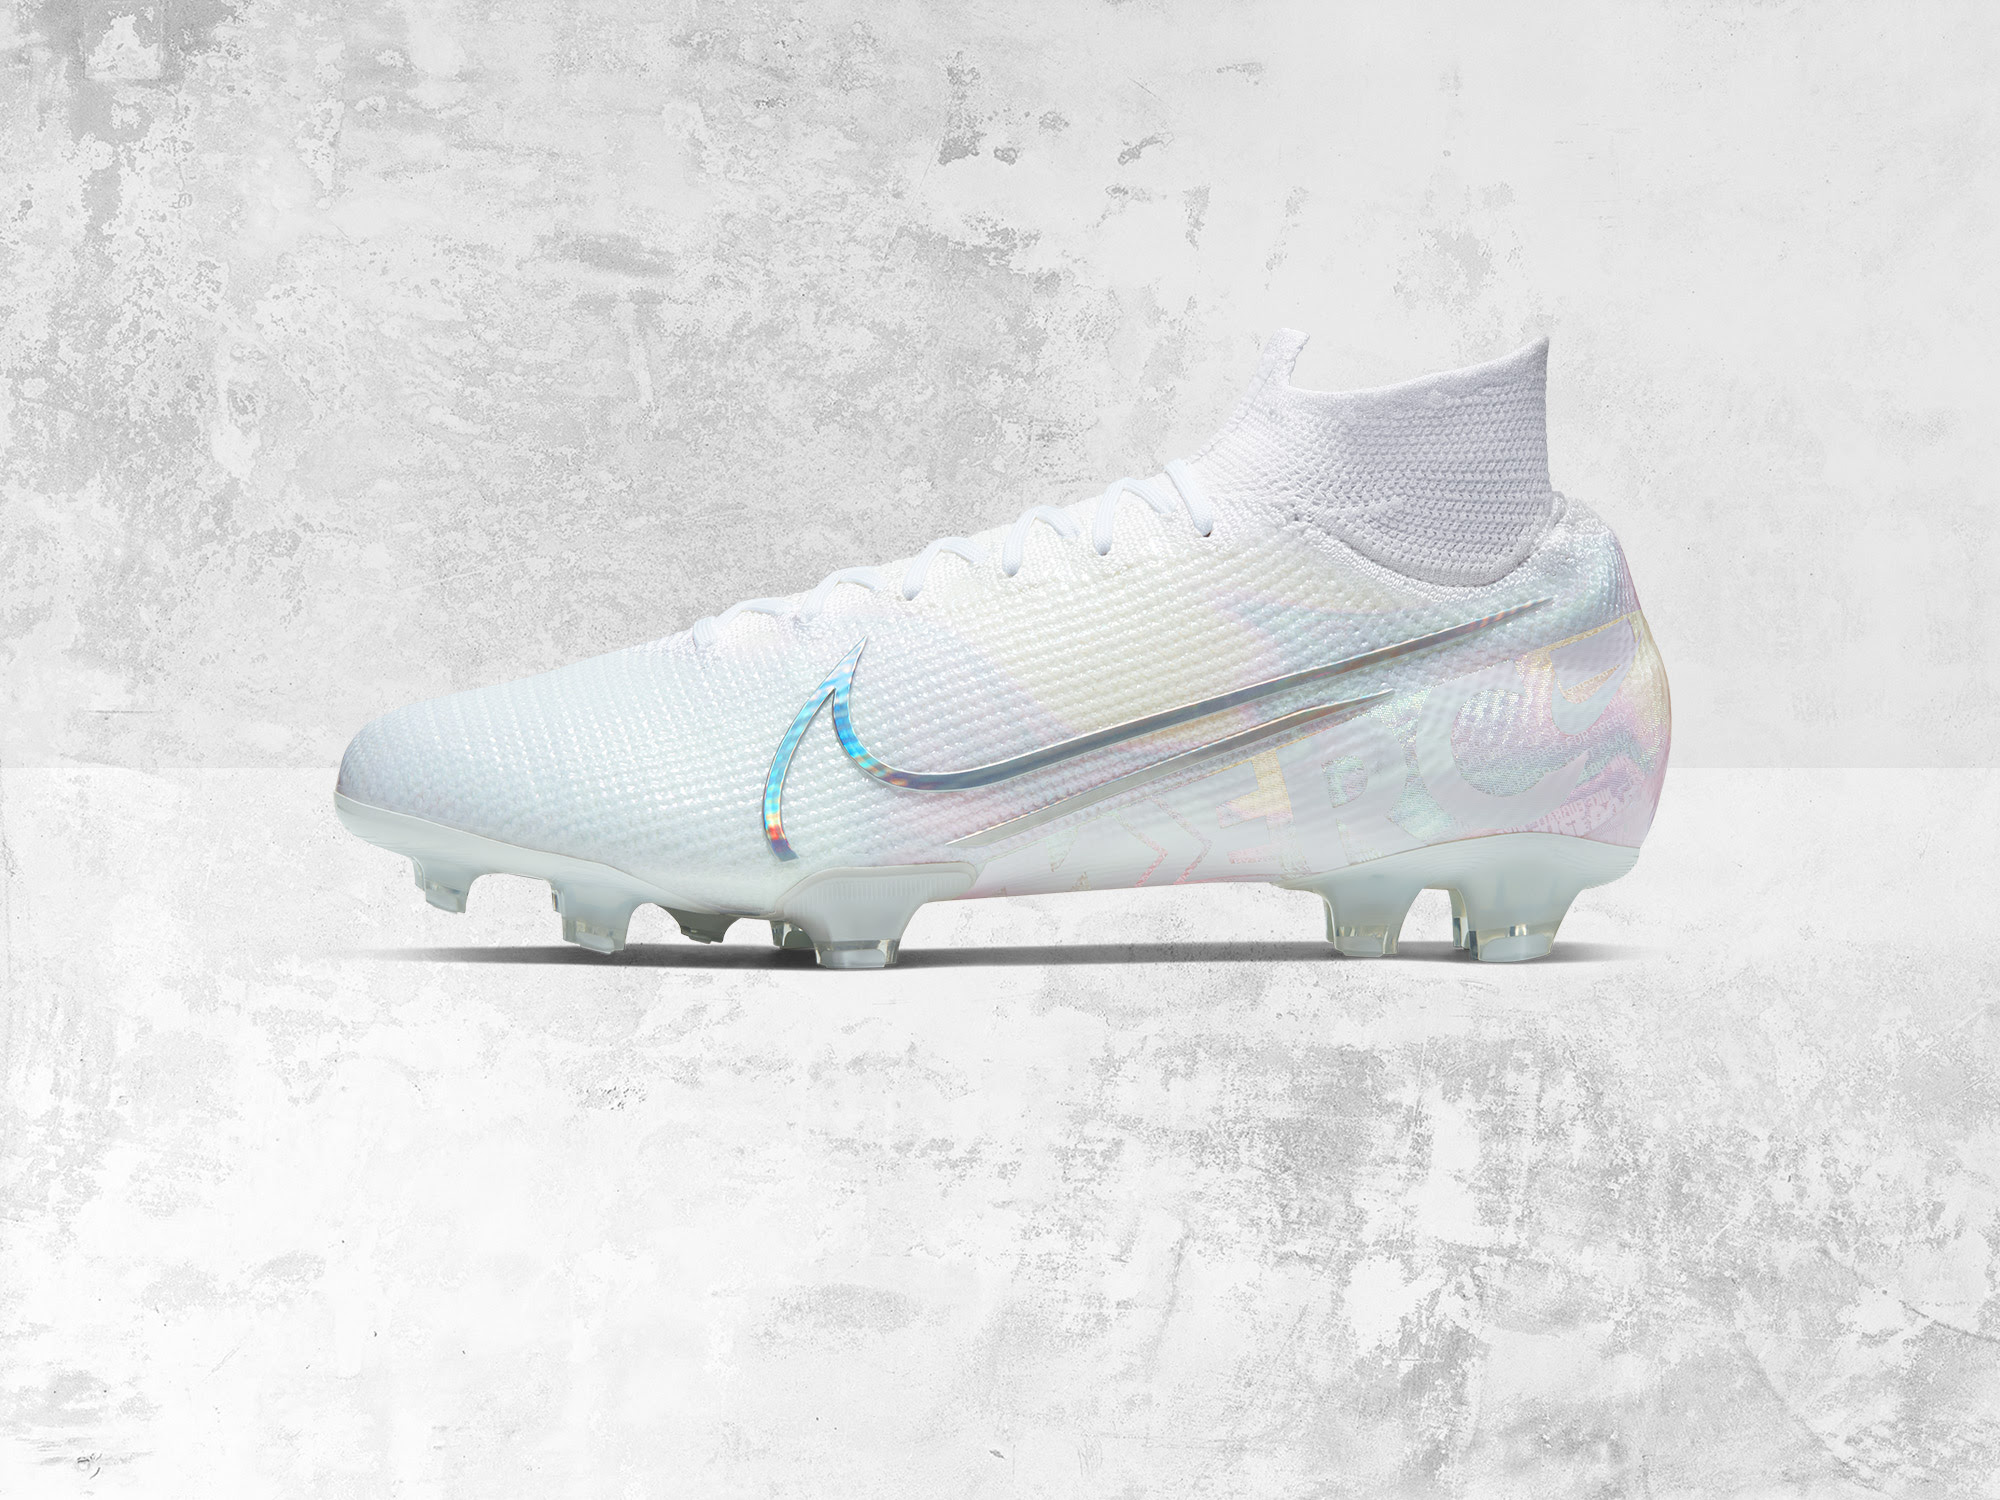 Nike Mercurial Superfly "Nuovo White"